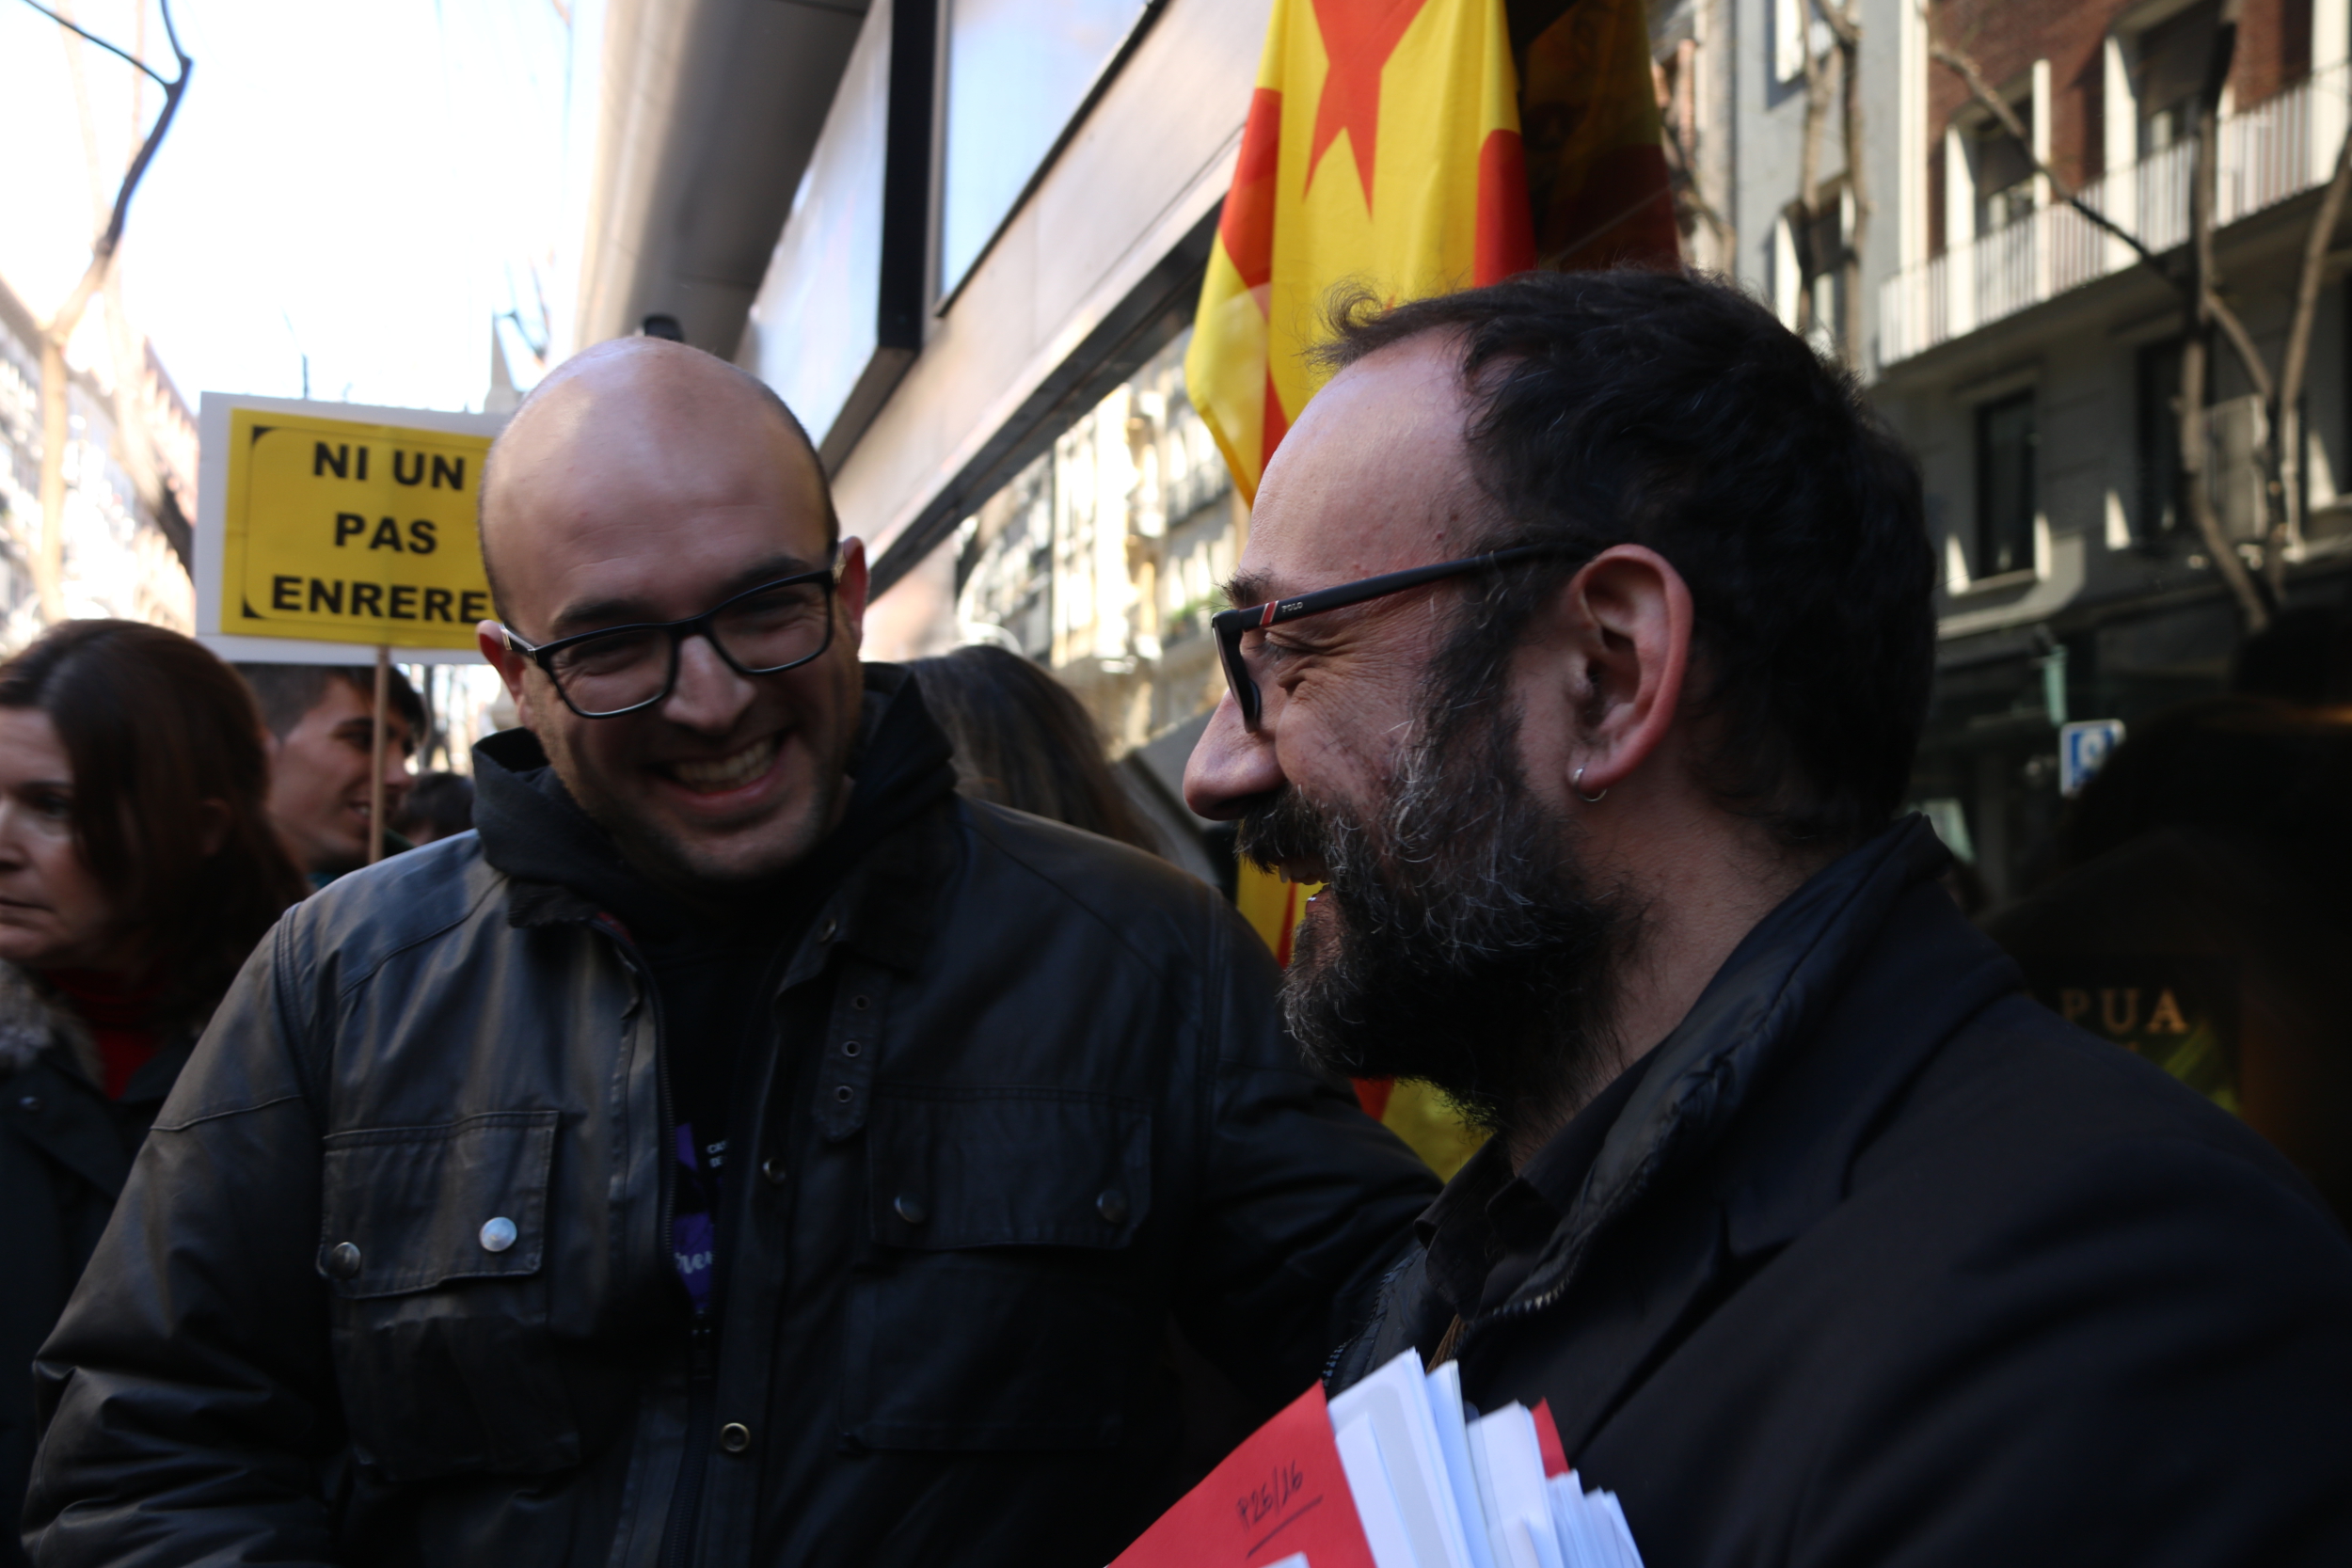 Vic City Councillor, Joan Coma, and his lawyer, CUP MP Benet Salellas in front of Madrid's Audiencia Nacional (by ACN)